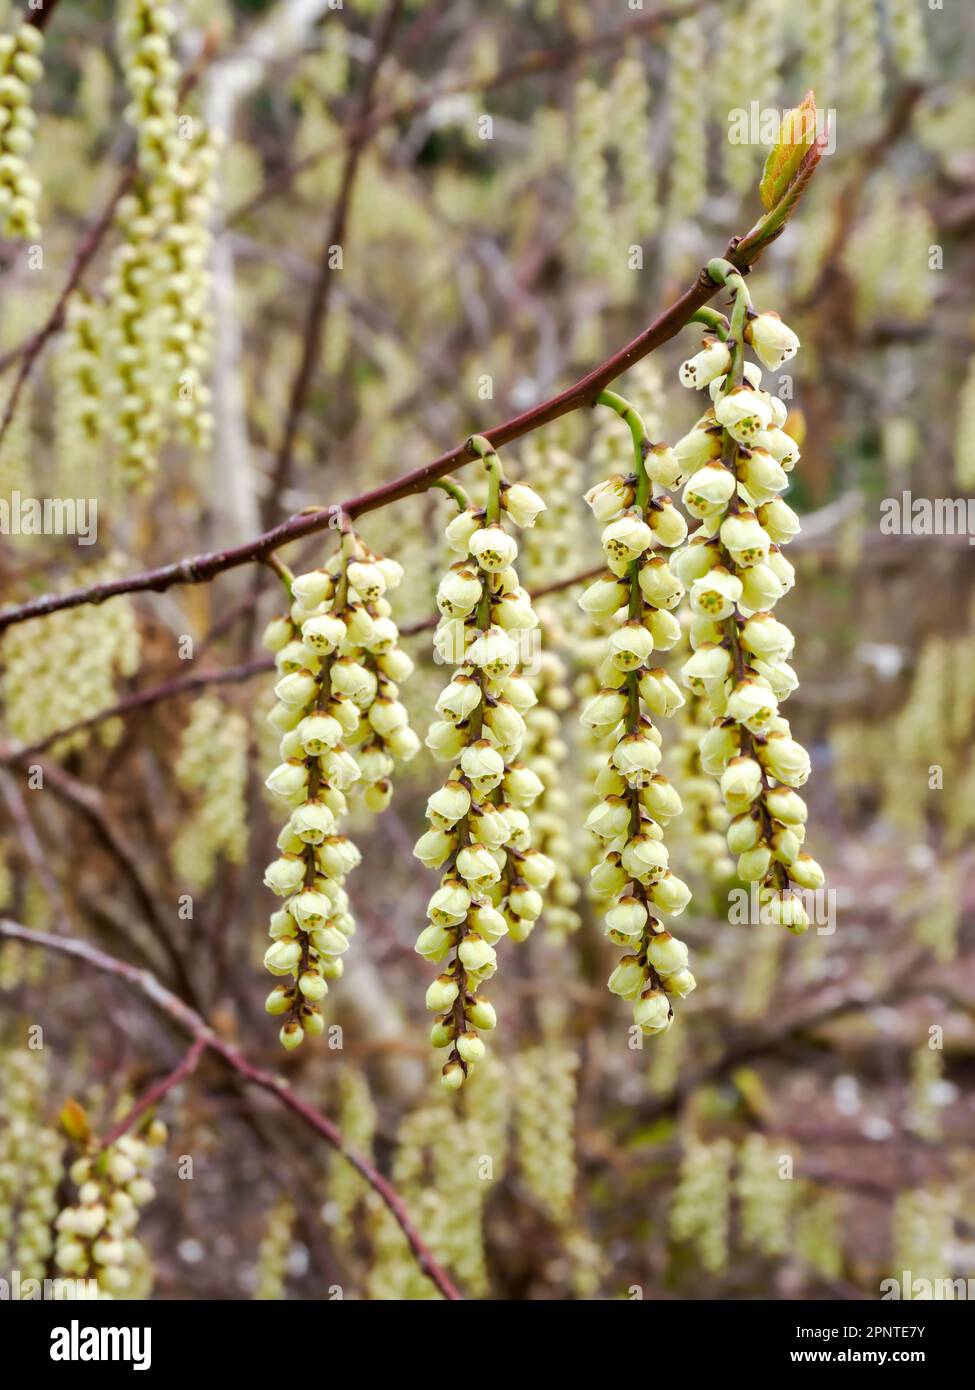 Racemes of bell-shaped flowers of Chinese Stachyurus S. chinensis an attractive shrub native to China and Taiwan grown as an ornamental garden plant Stock Photo